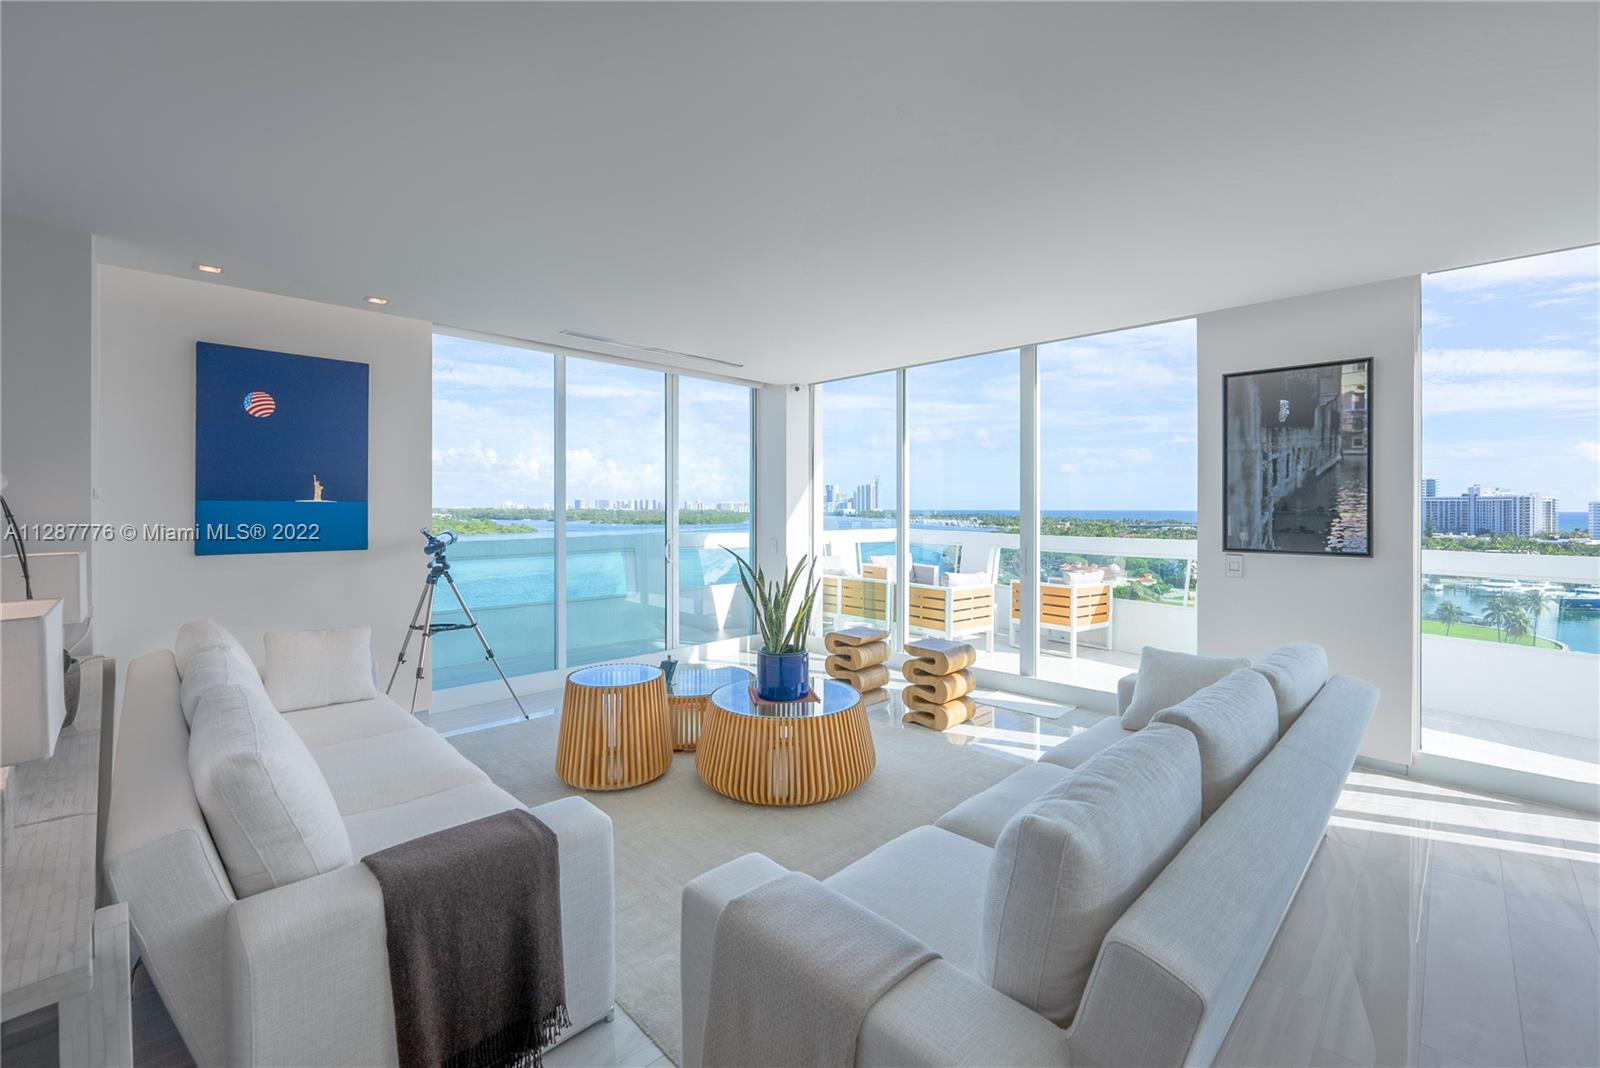 Introducing this one-of-a-kind extravagant Penthouse situated in the twelve-story condo boutique building Le Nautique of the prestigious Bay Harbor Islands. Entering through the private foyer, this bright and spacious three-bedroom plus a den, three-and-a-half-bathroom residence boasts expansive ocean and bay views along with twelve-and-a-half-foot ceiling heights in the master bedroom. The European-style custom-made open kitchen features stainless steel appliances and designer finishes flow throughout. Magnificent Waterfront Home in the Sky is in close proximity to famous Bal Harbour shops and fine-dining restaurants. Become an owner of one of the twelve exquisite residences and transform your way of living in a secluded, safe, and one of the most desired neighborhoods.